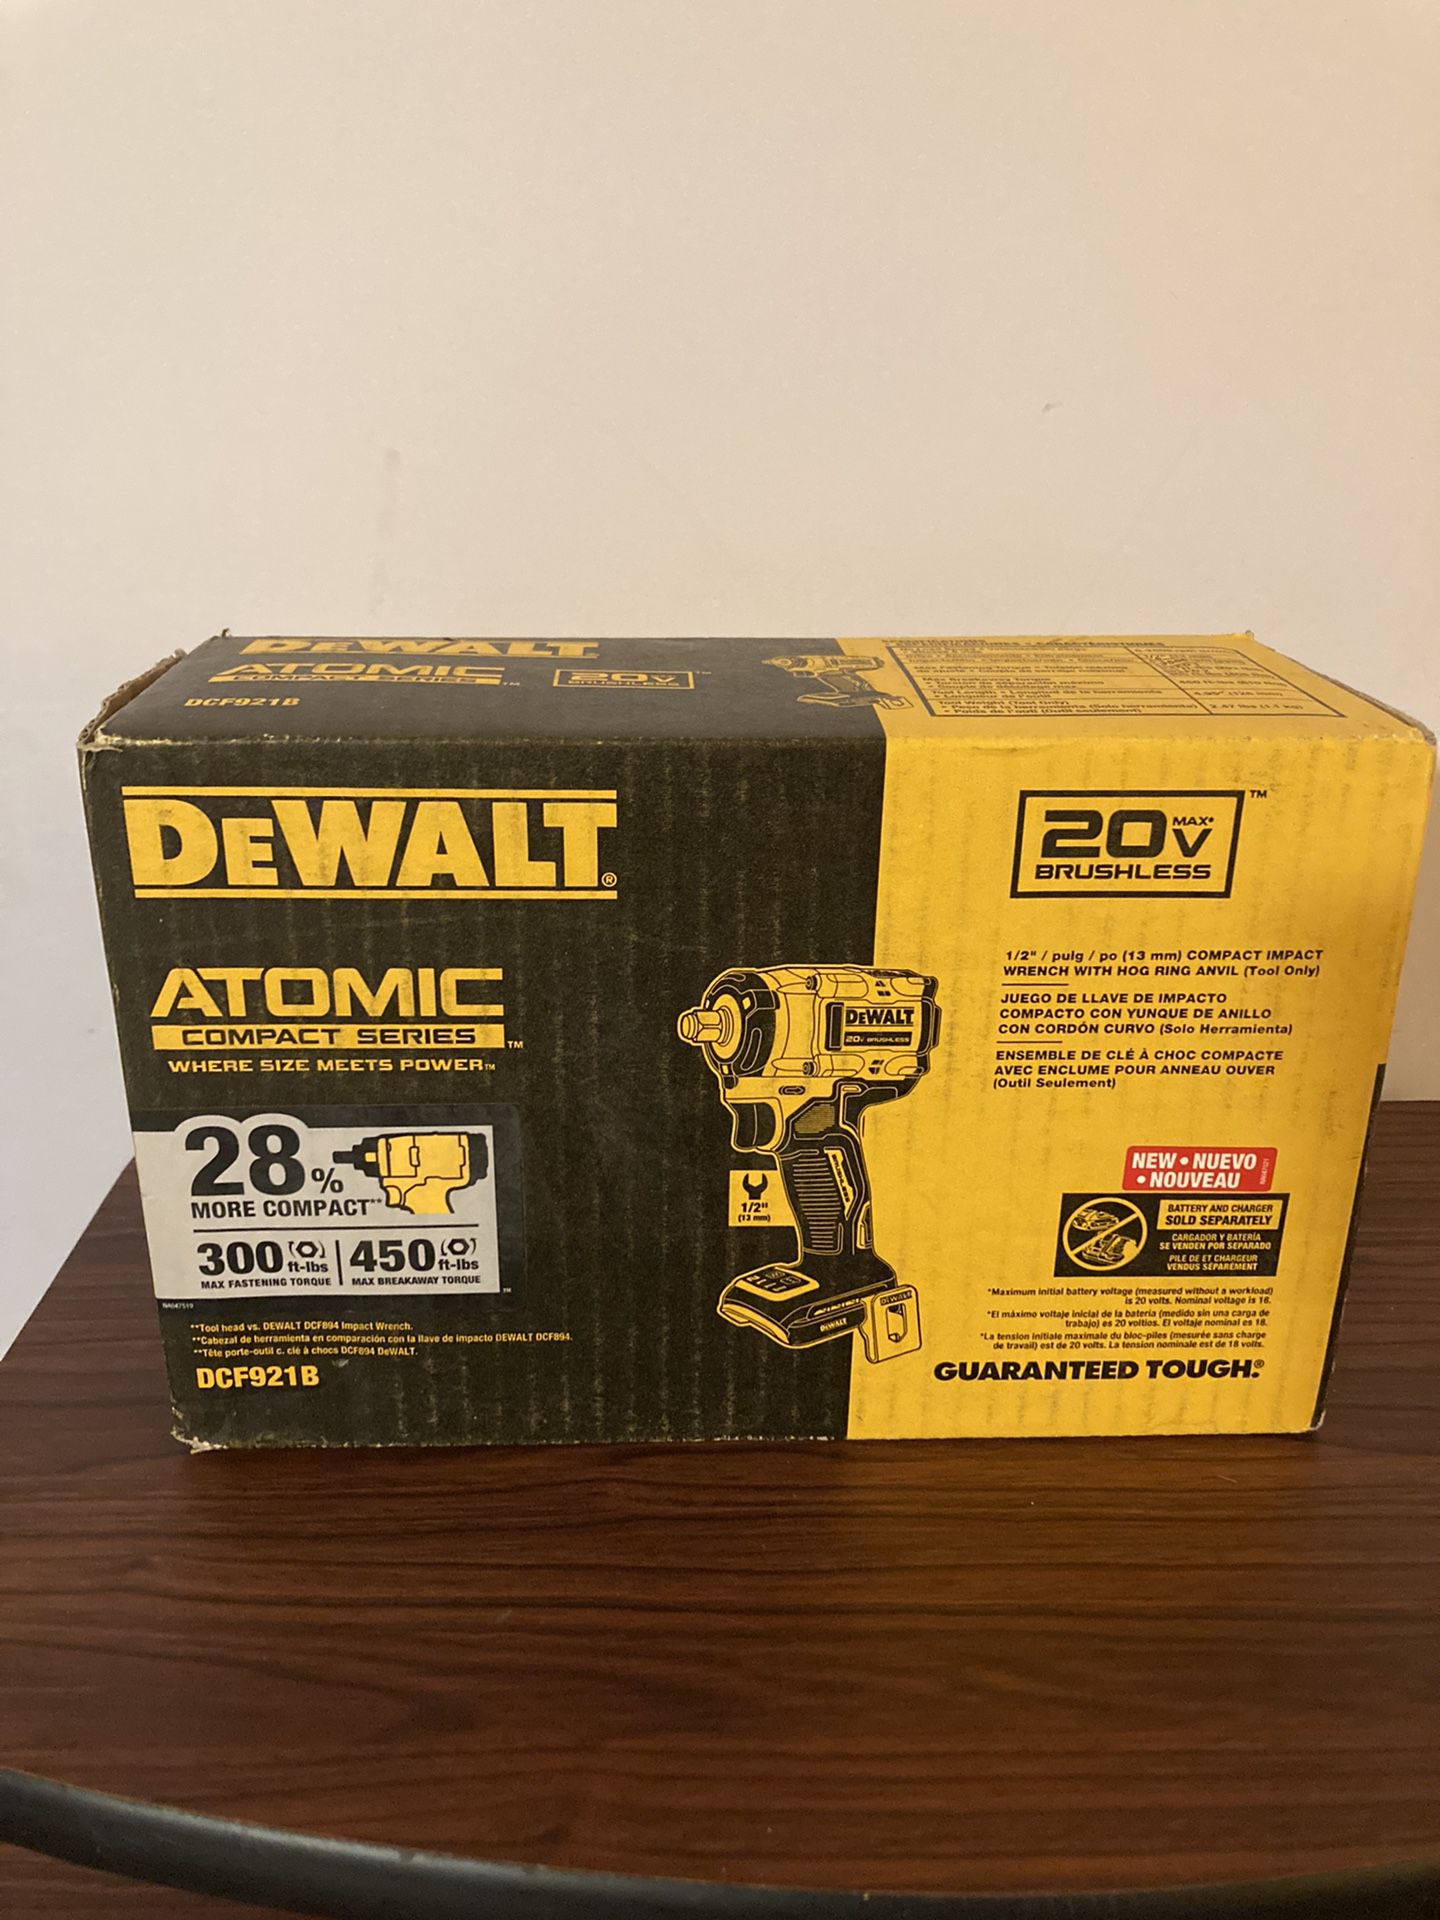 DEWALT ATOMIC 20V MAX Cordless Brushless 1/2 in. Impact Wrench DCF921B (Tool Only)